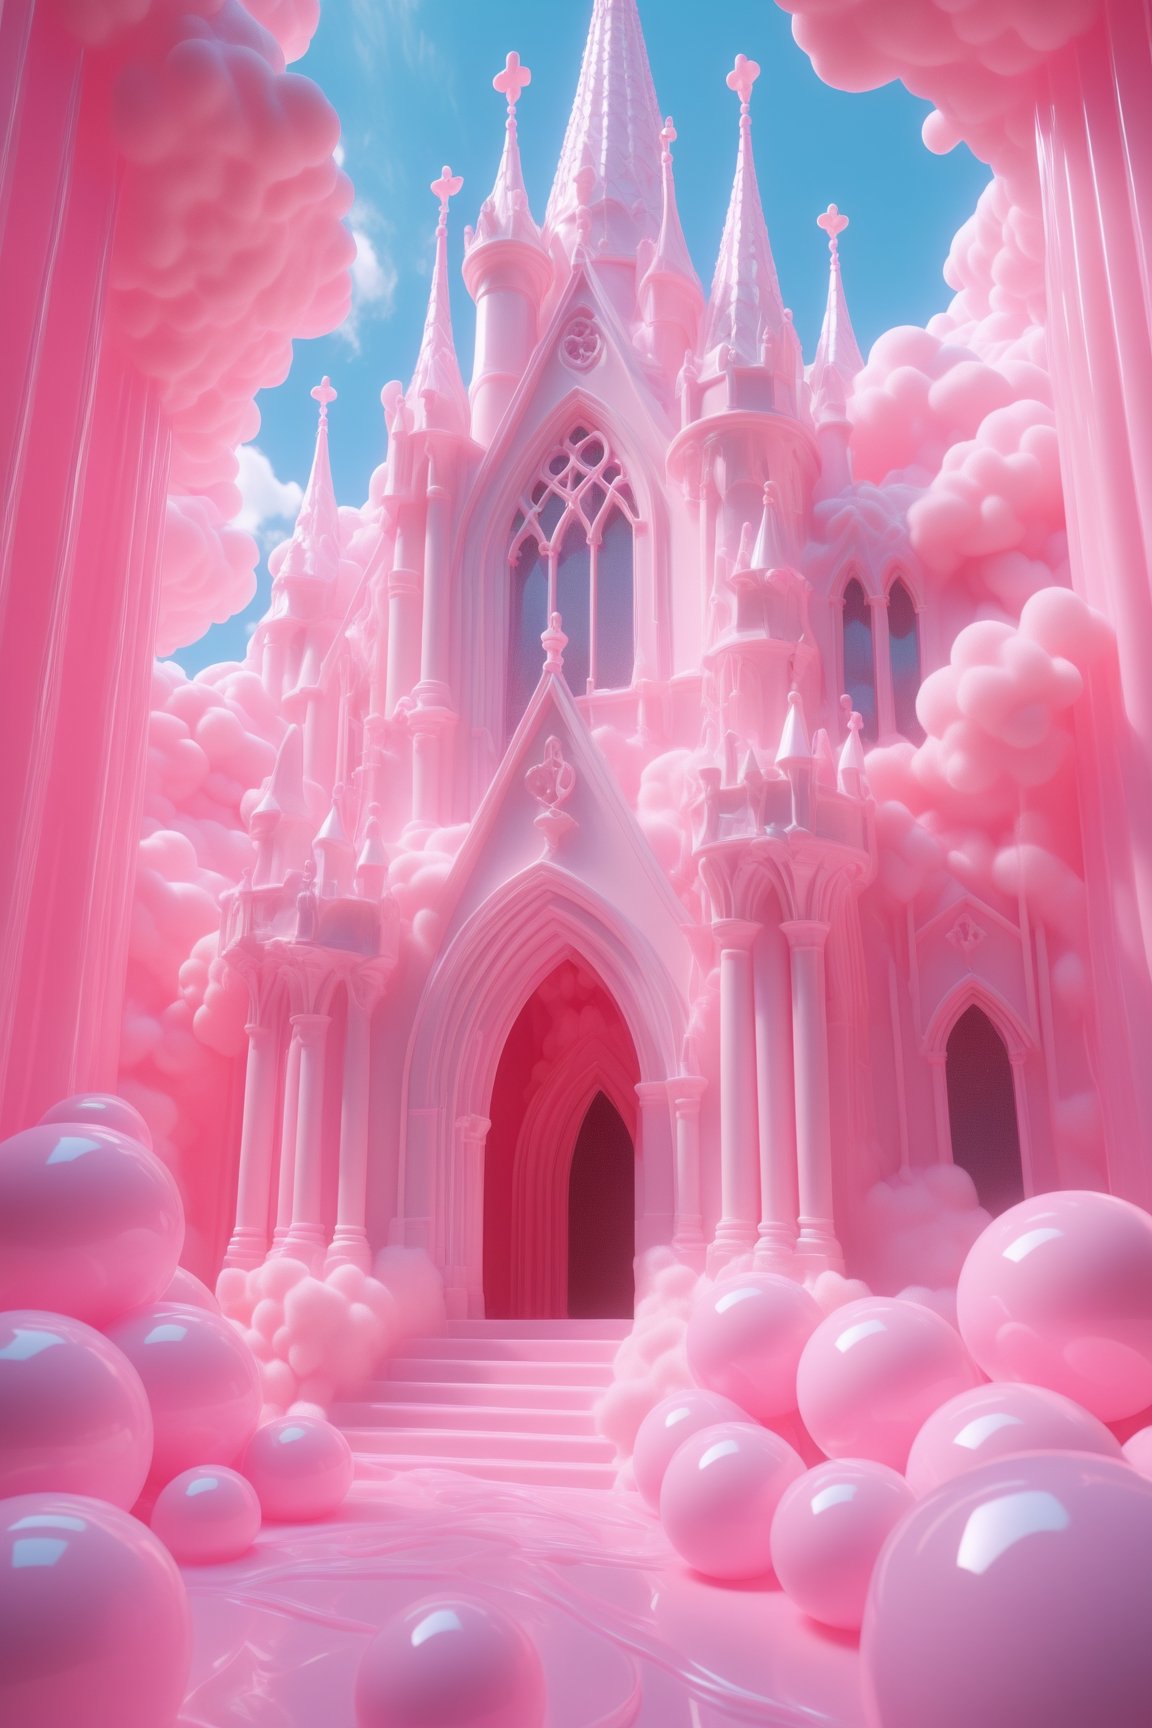 create a gothic architecture made of milk, splashed, drips, subsurface scattering, detailed milk material, puffy cotton candy clouds, aesthetic light and shadow 3d, translucent plastic bubblegum, fluorescent, translucent, 100mm,Movie Still,detailmaster2,Film Still,make_3d,aesthetic portrait